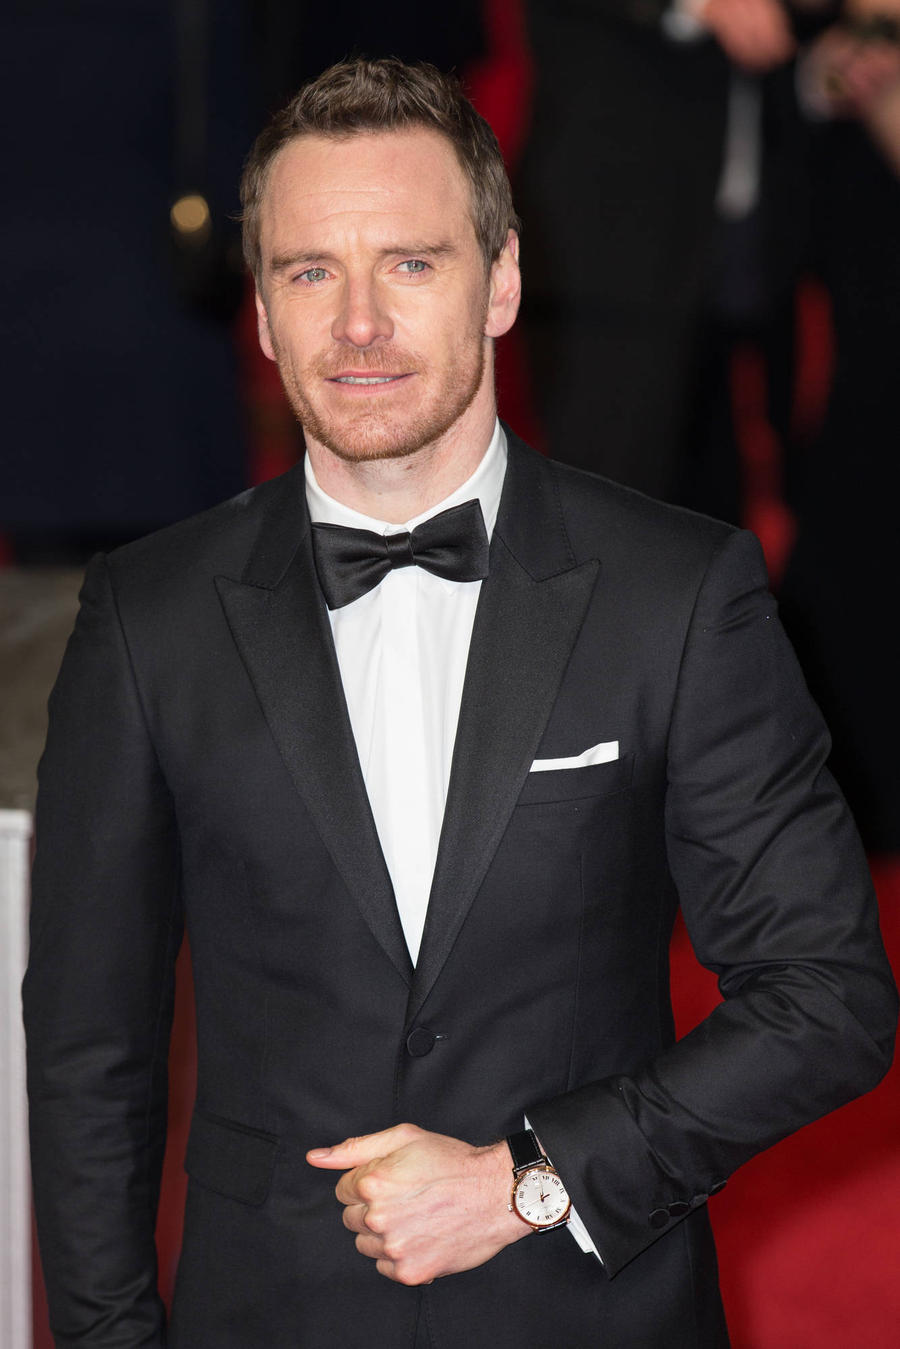 Michael Fassbender Cringes With Embarrassment At Tiff 